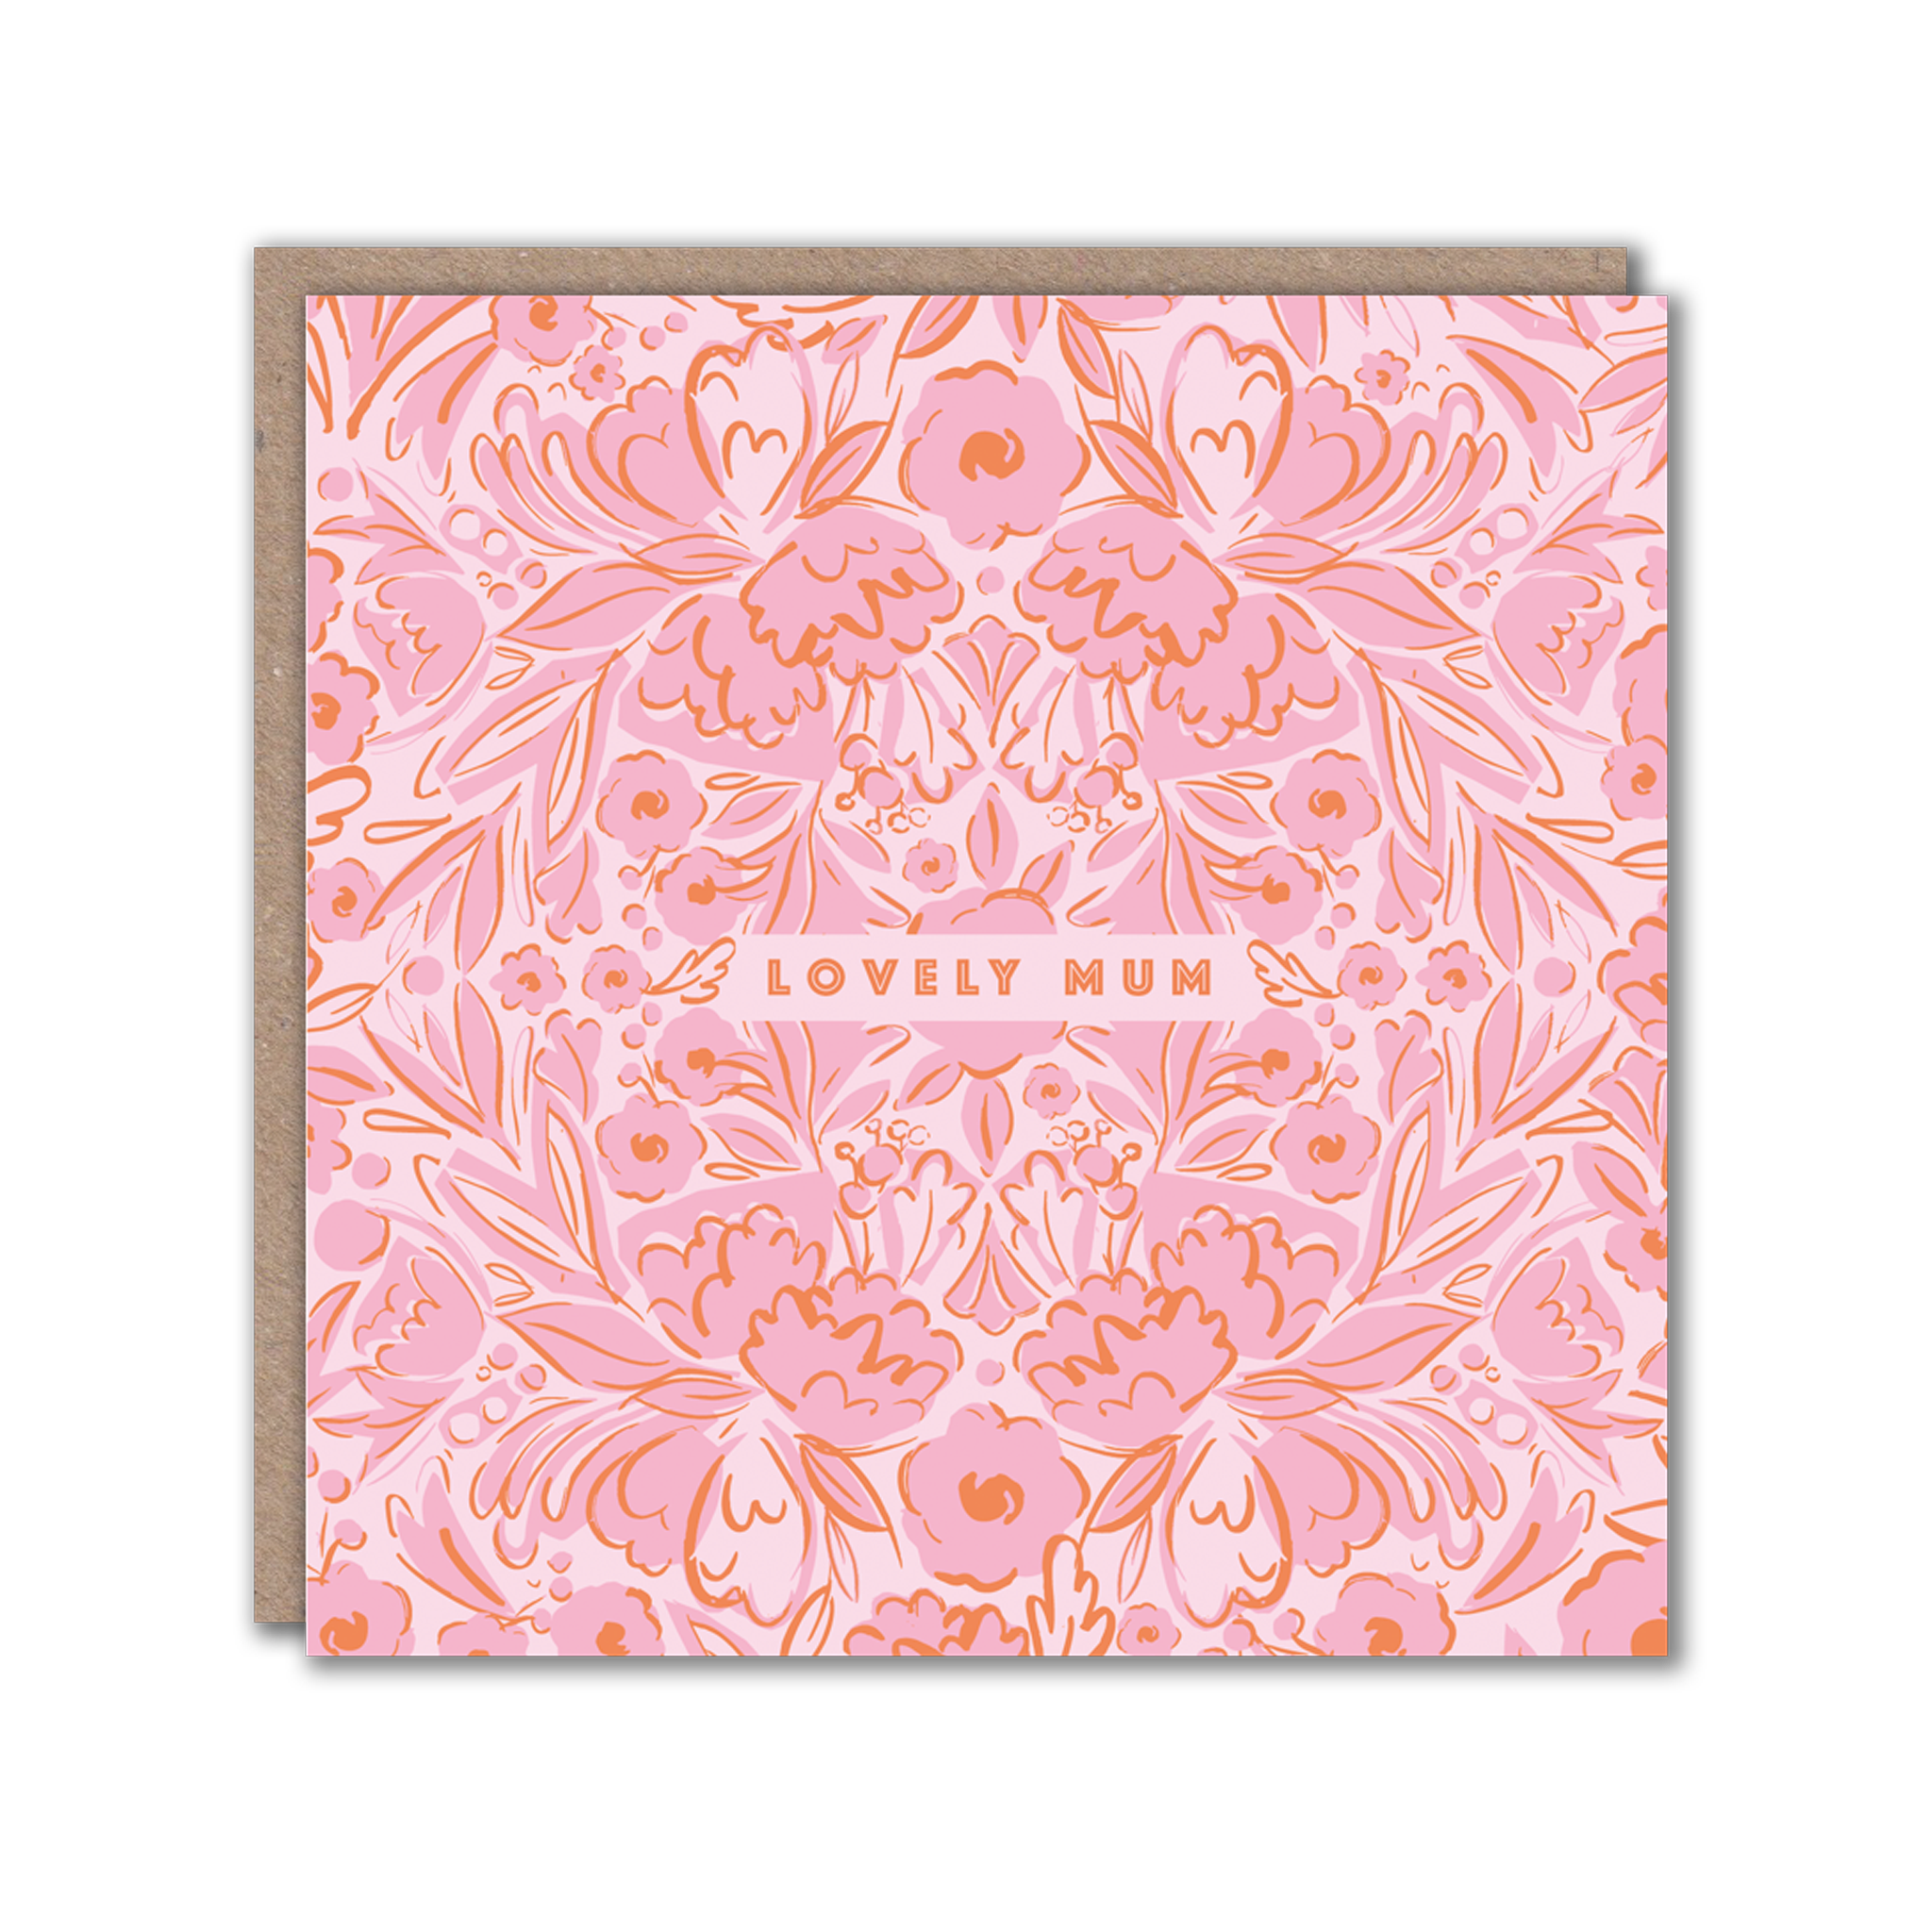 pink patterned lovely mum card